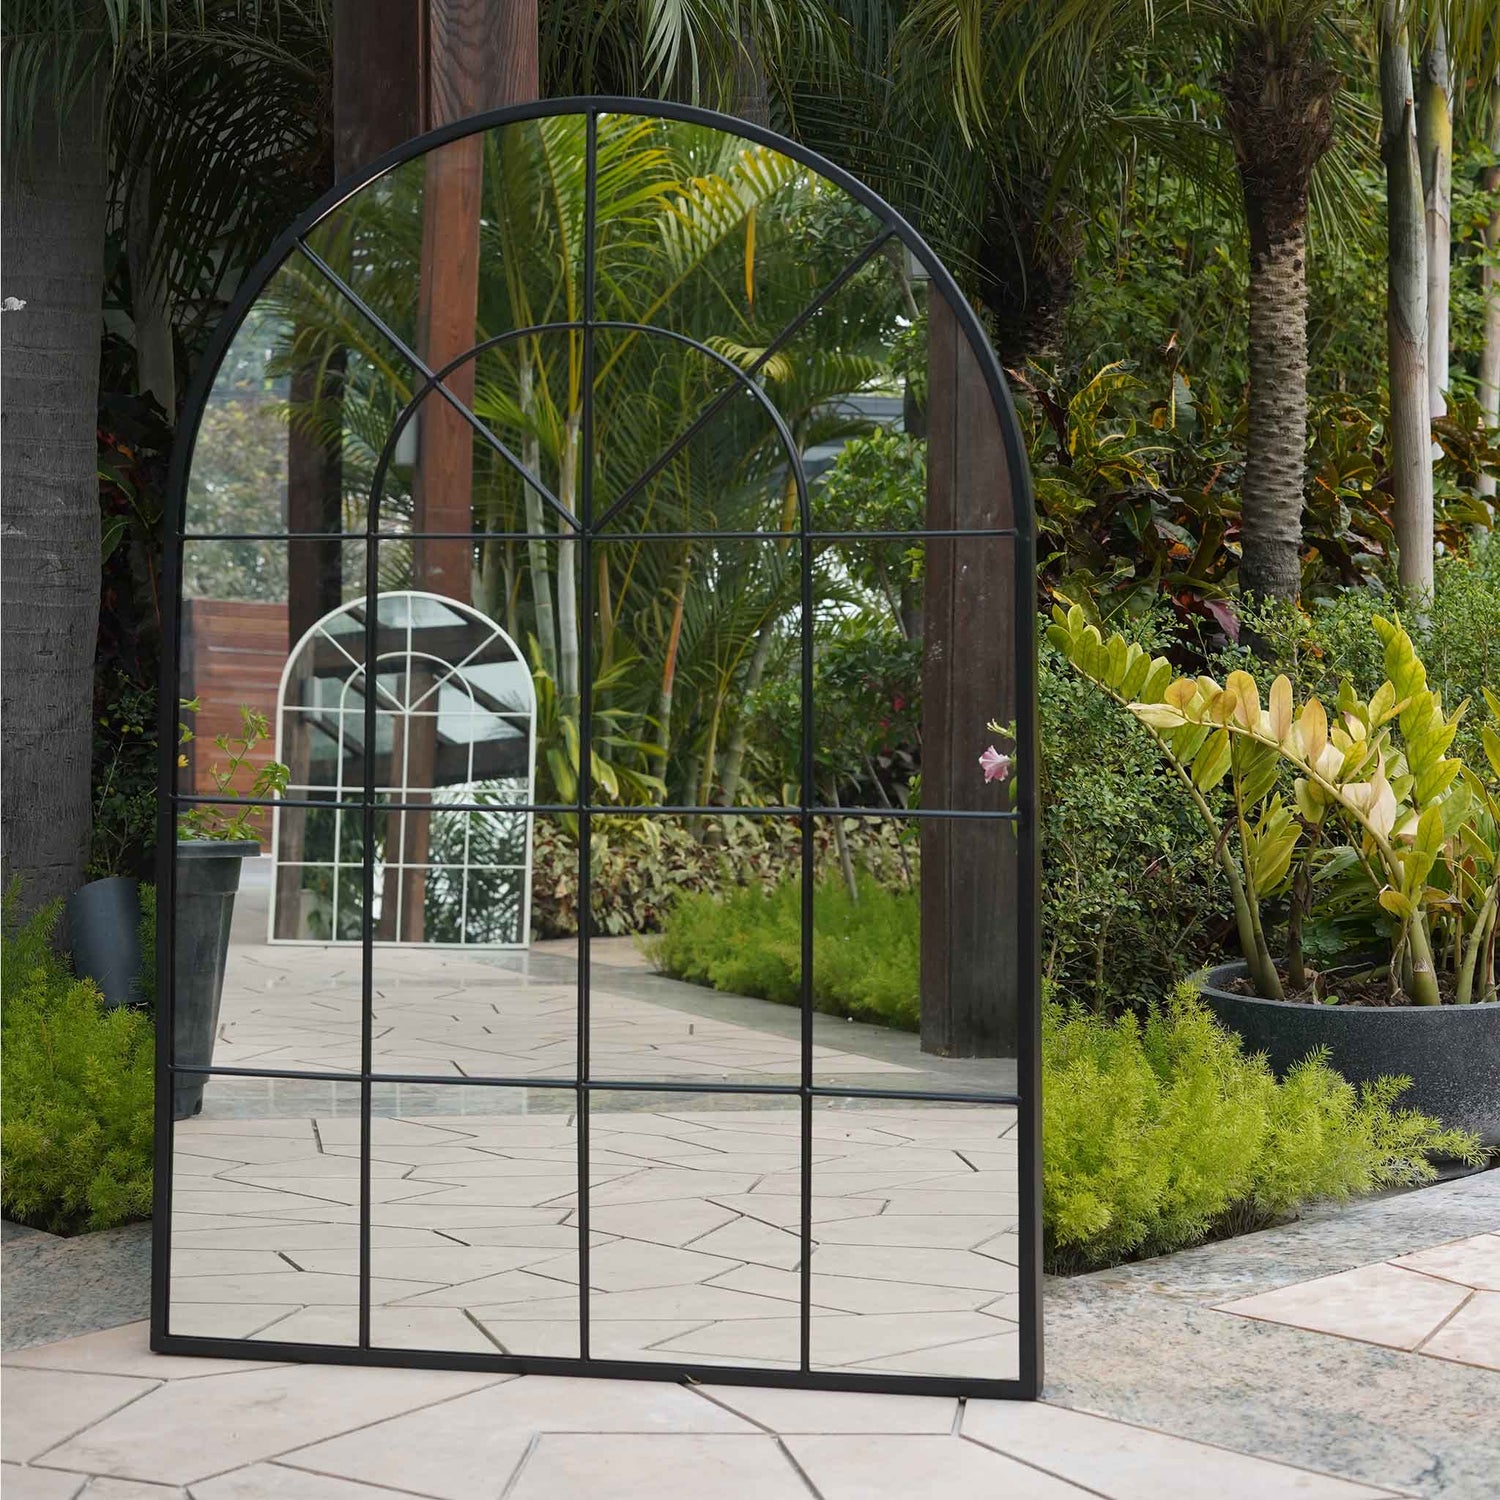 A large black metallic mirror in the shape of a window .